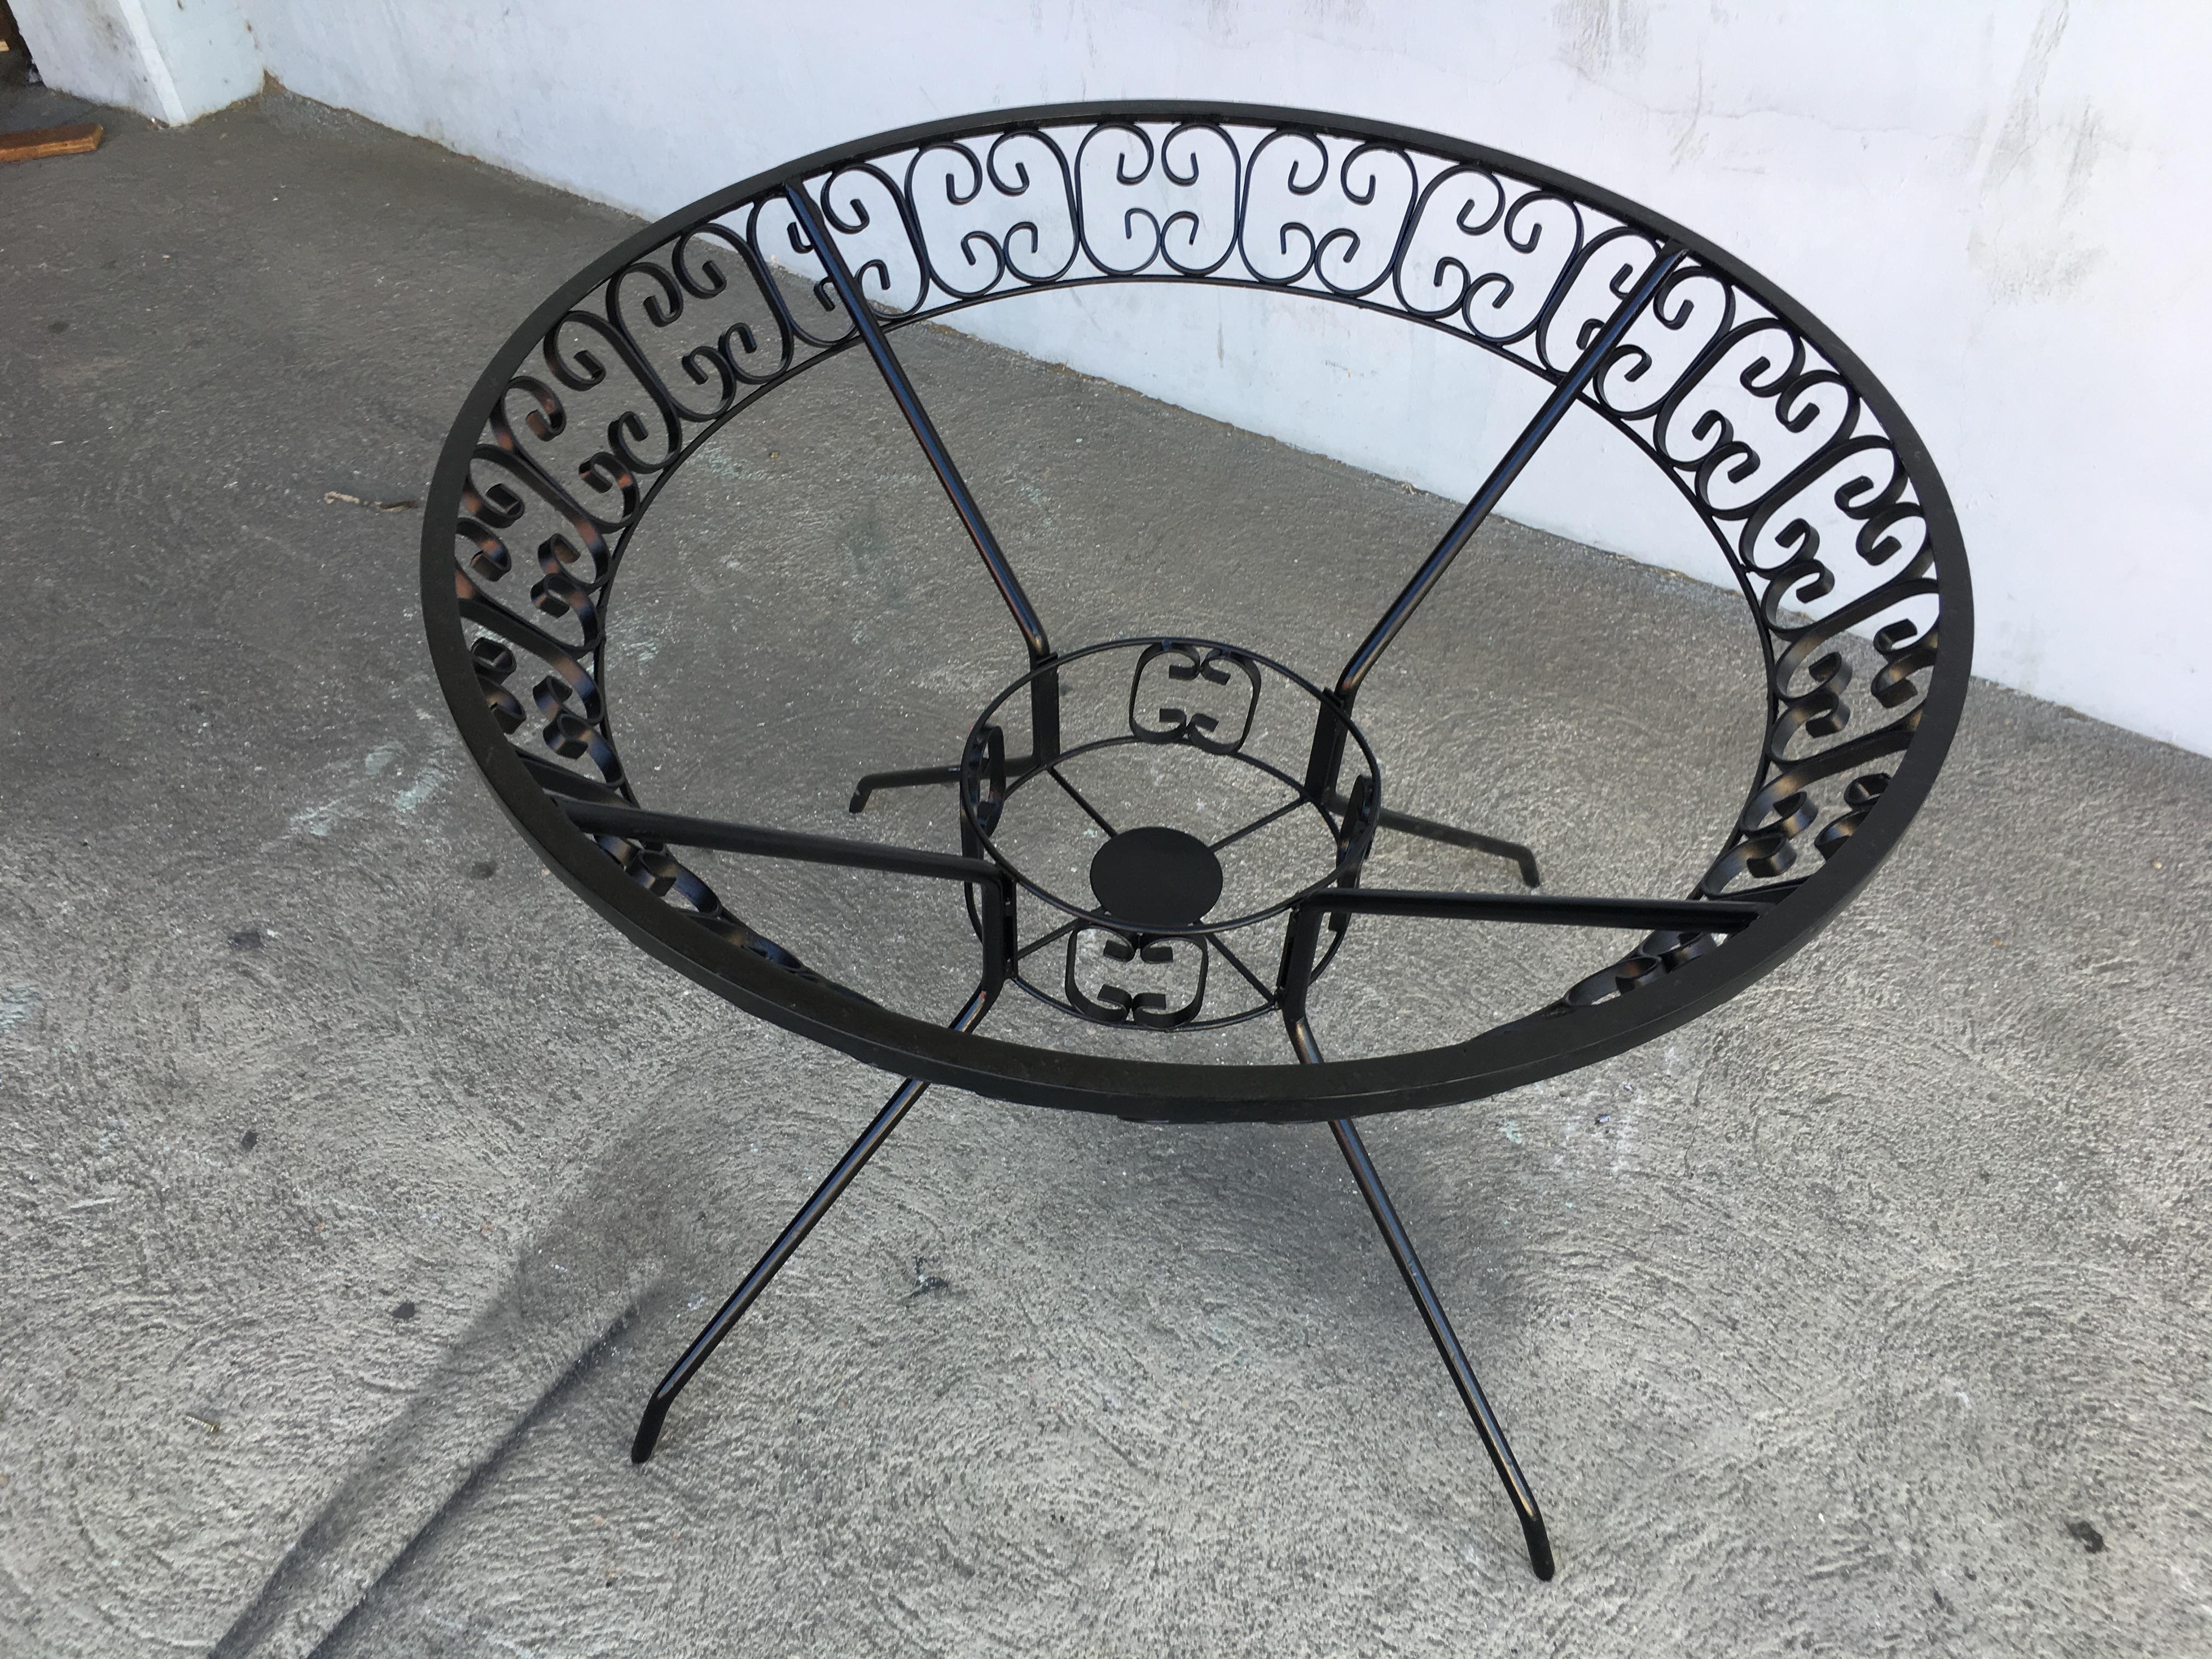 Midcentury iron and glass outdoor patio/outdoor picnic table designed by Maurizio Tempestini for the Salterini company. It comes with the iconic side Ribbon scrolling patterns of Maurizio Tempestini during the 1950s and 1960s.